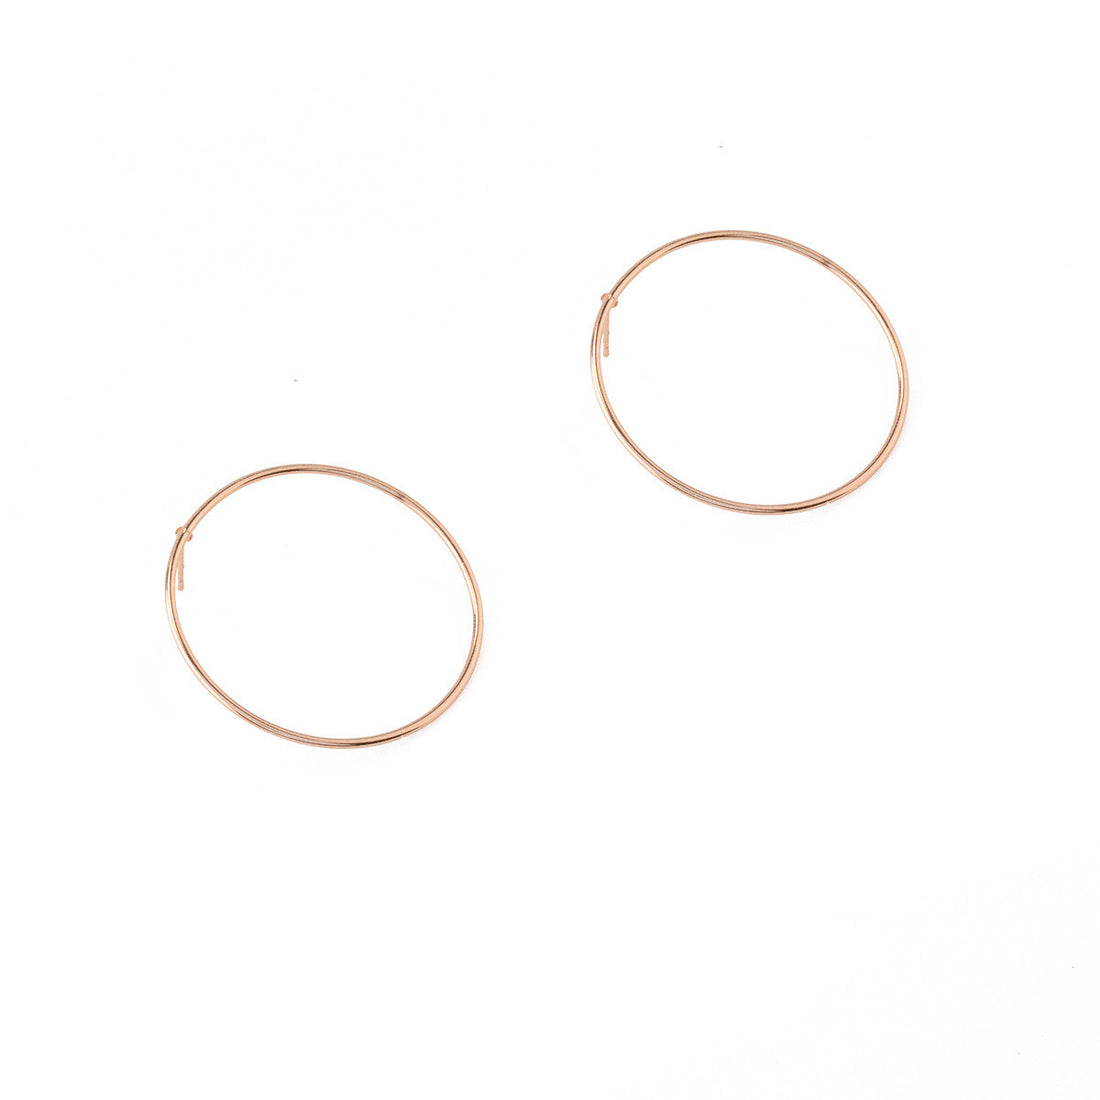 Contracted Joker Copper Smooth Circle Earrings - Oh Yours Fashion - 1